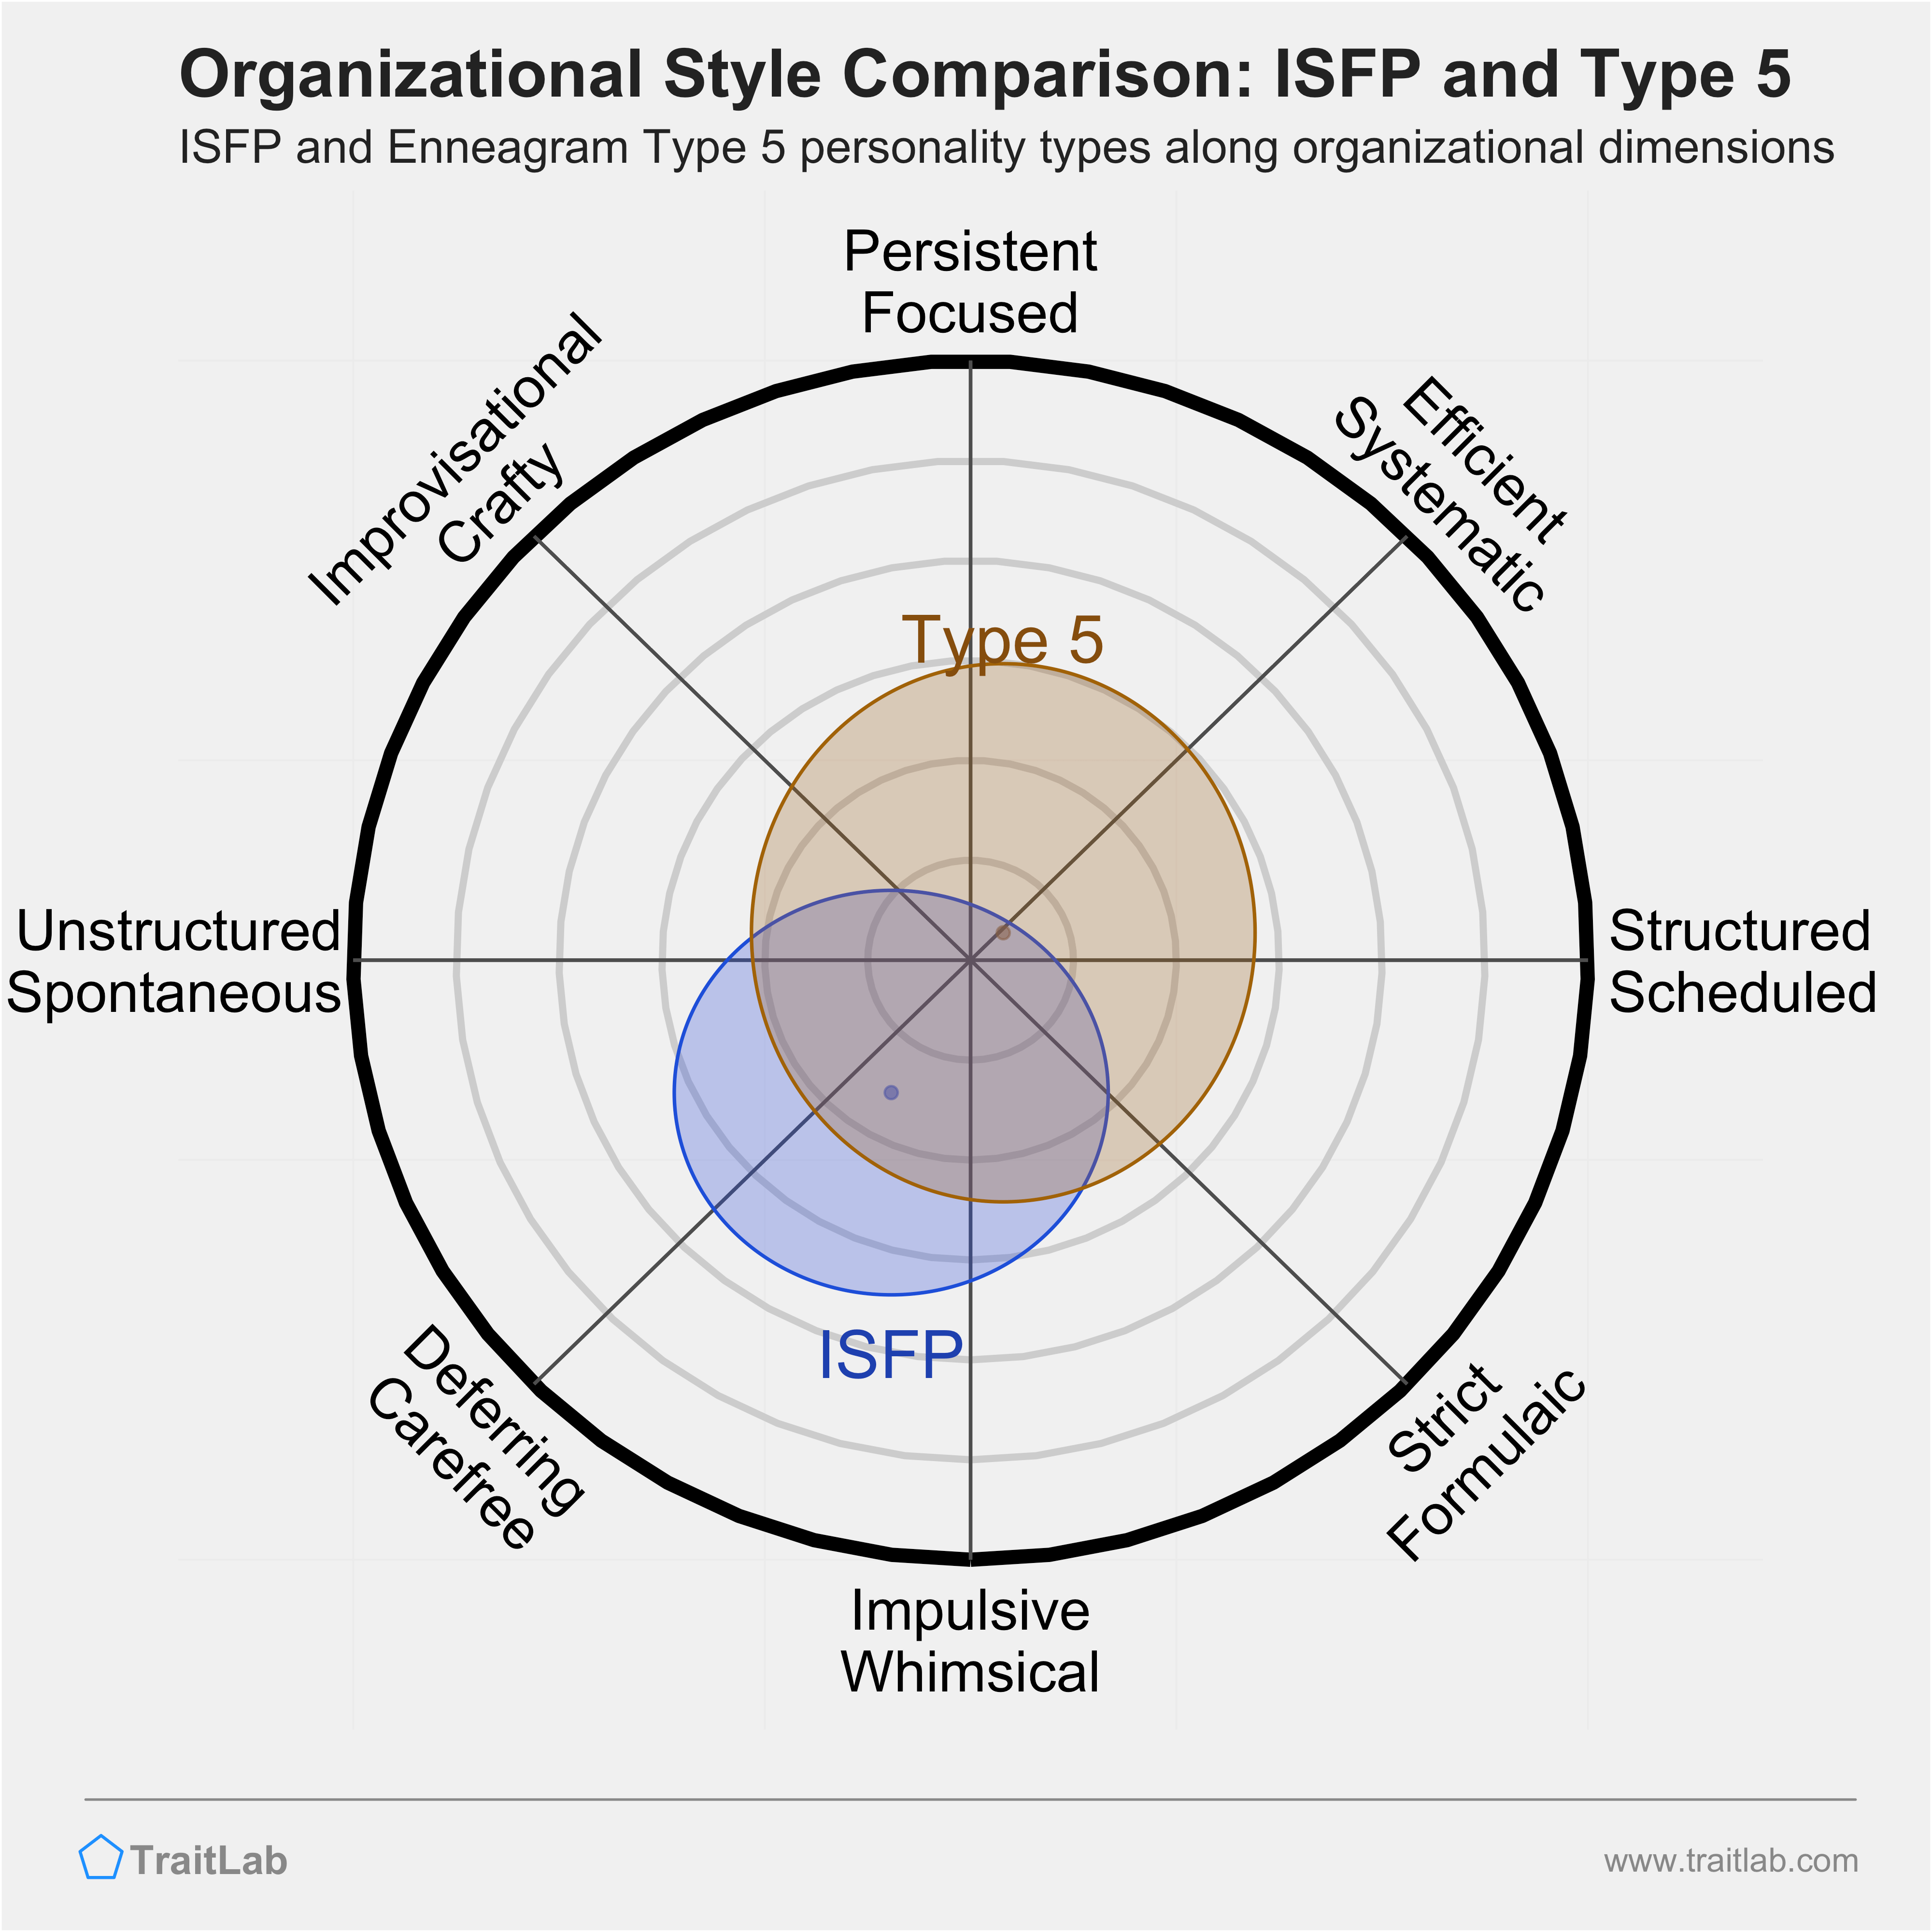 ISFP and Type 5 comparison across organizational dimensions